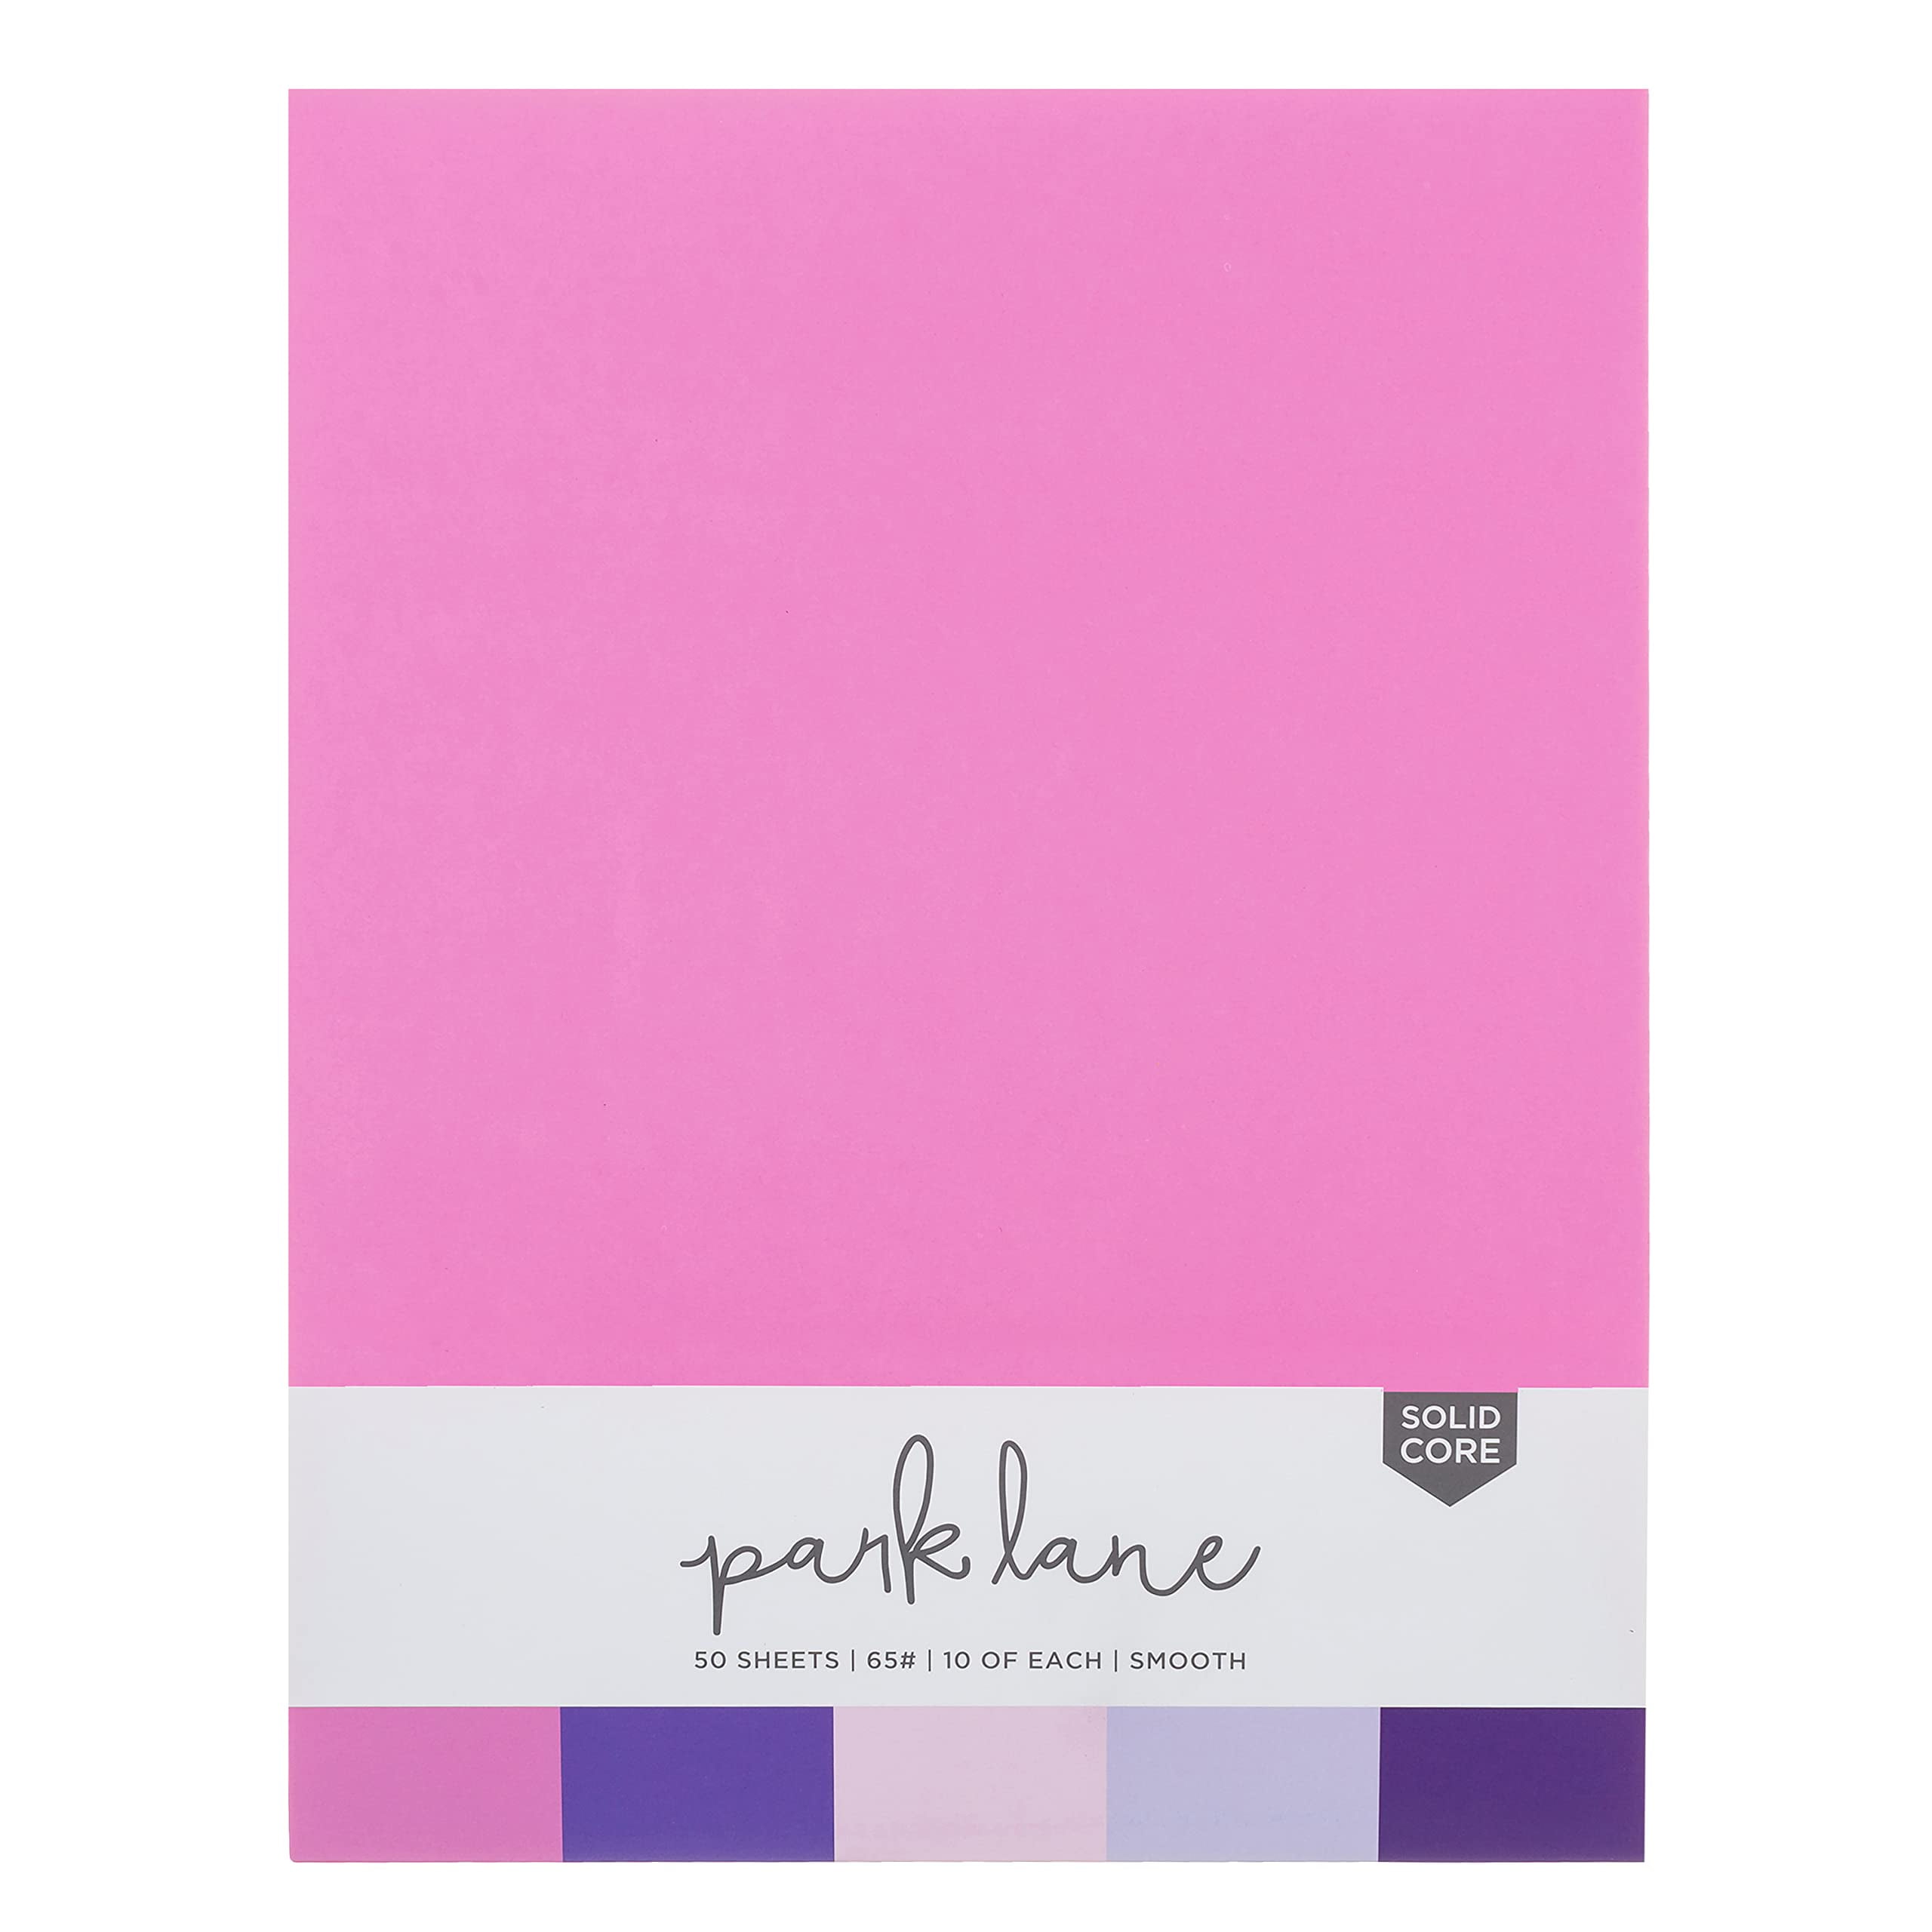 Buy Lee, A7 Size, Basis Brand Colored Card Stock, Magenta, 5x7